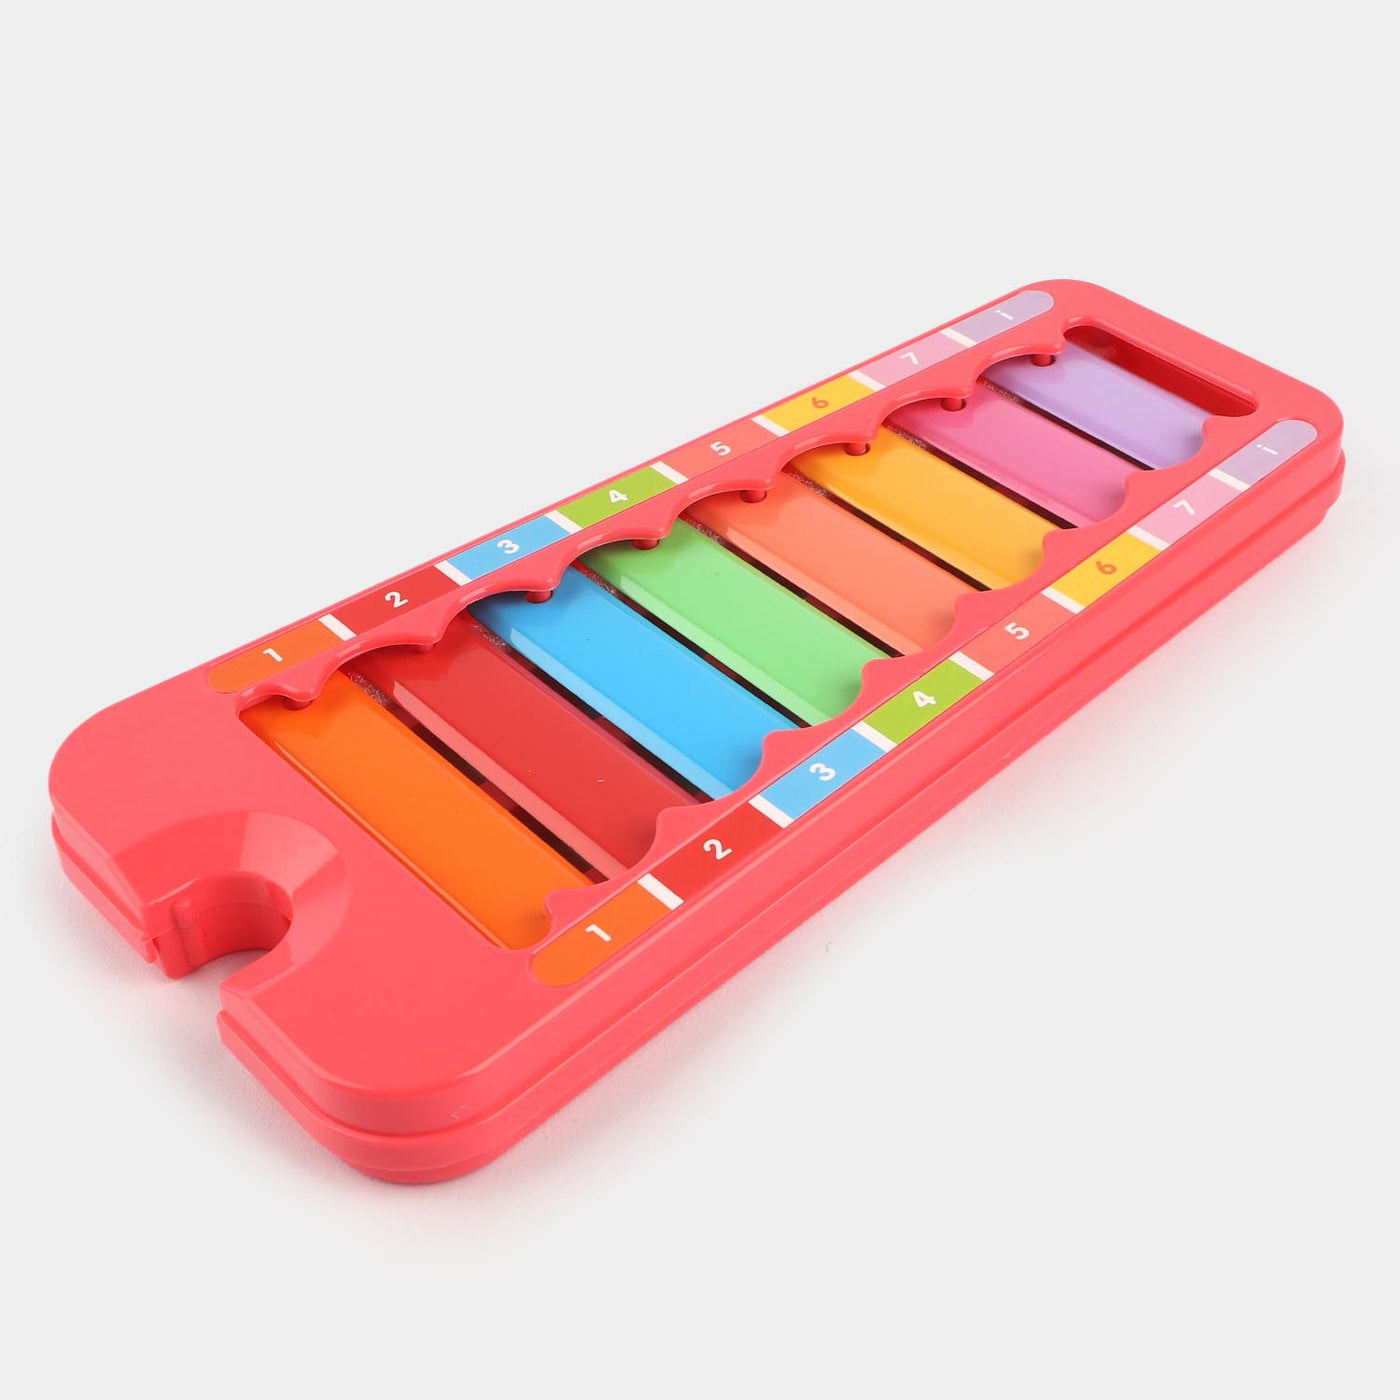 Baby Xylophone Play For Kids